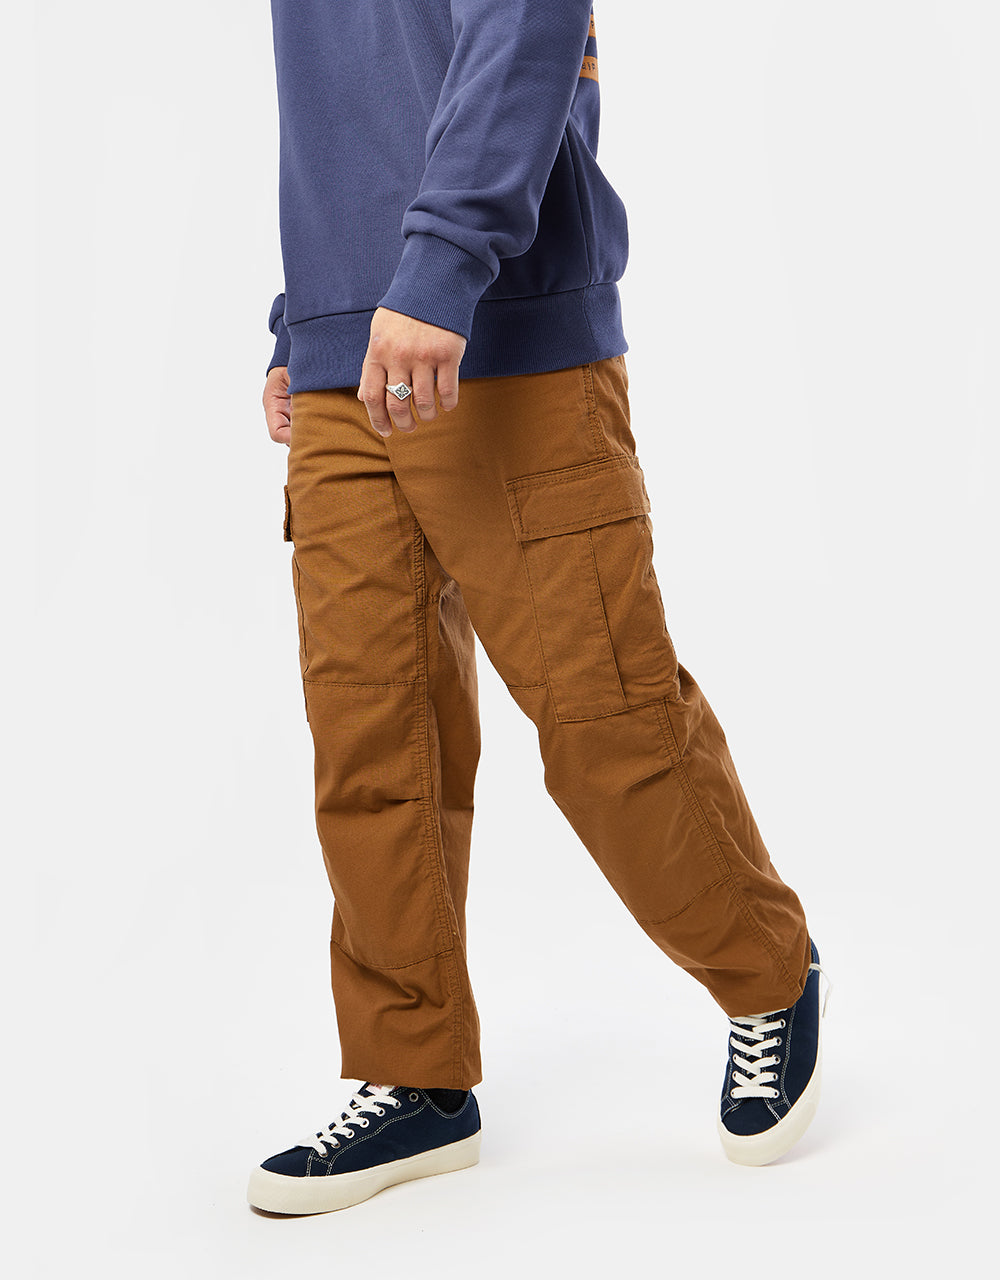 Carhartt WIP Sid Pant Men's Trousers, shell rinsed : Amazon.co.uk: Fashion